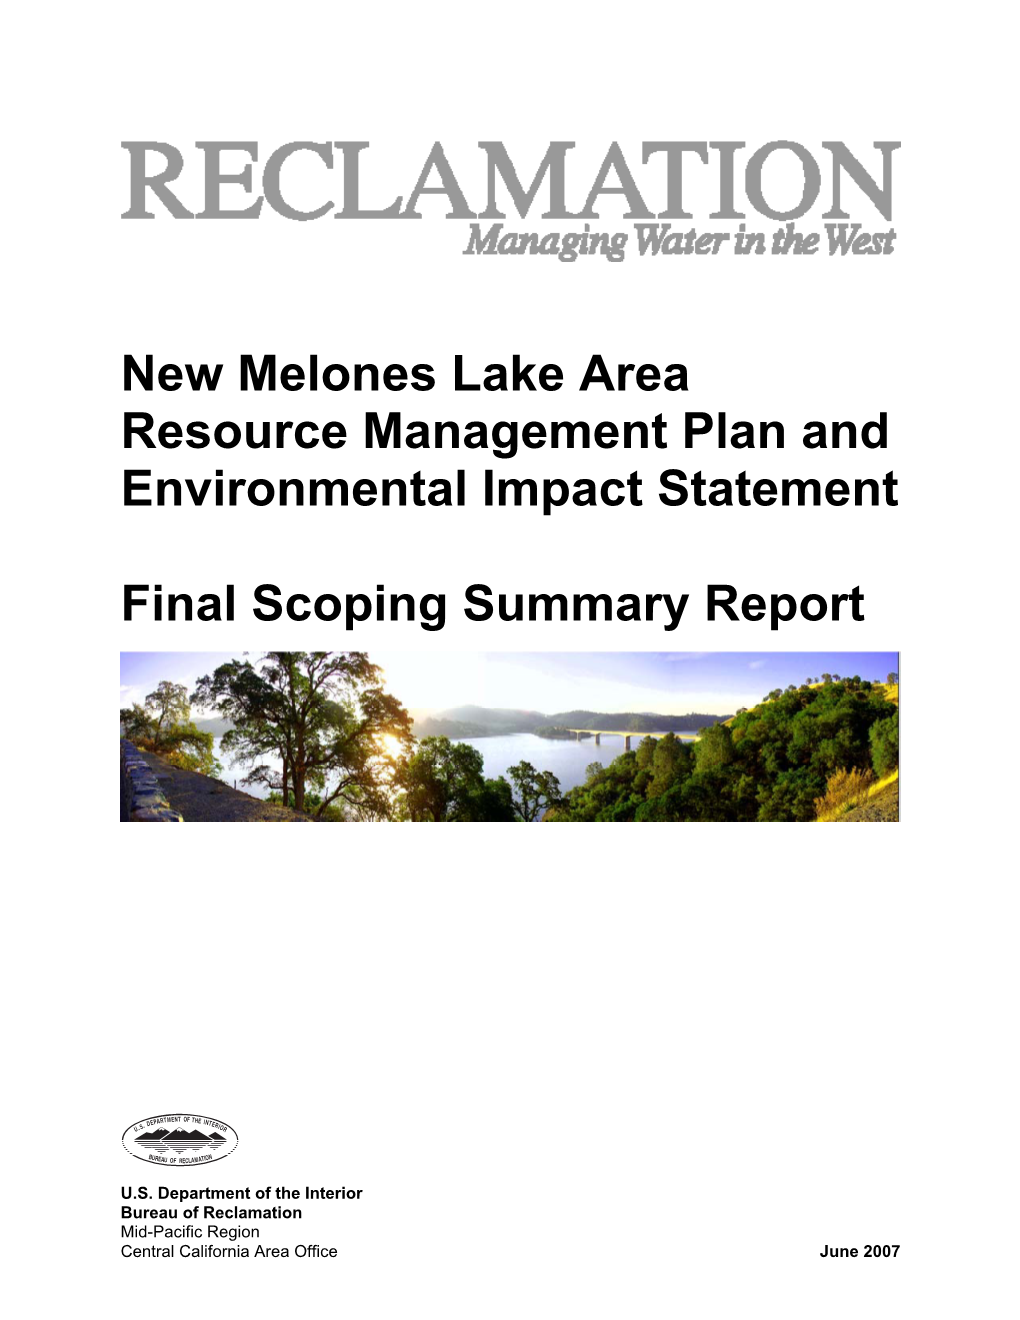 New Melones Lake Area Resource Management Plan and Environmental Impact Statement